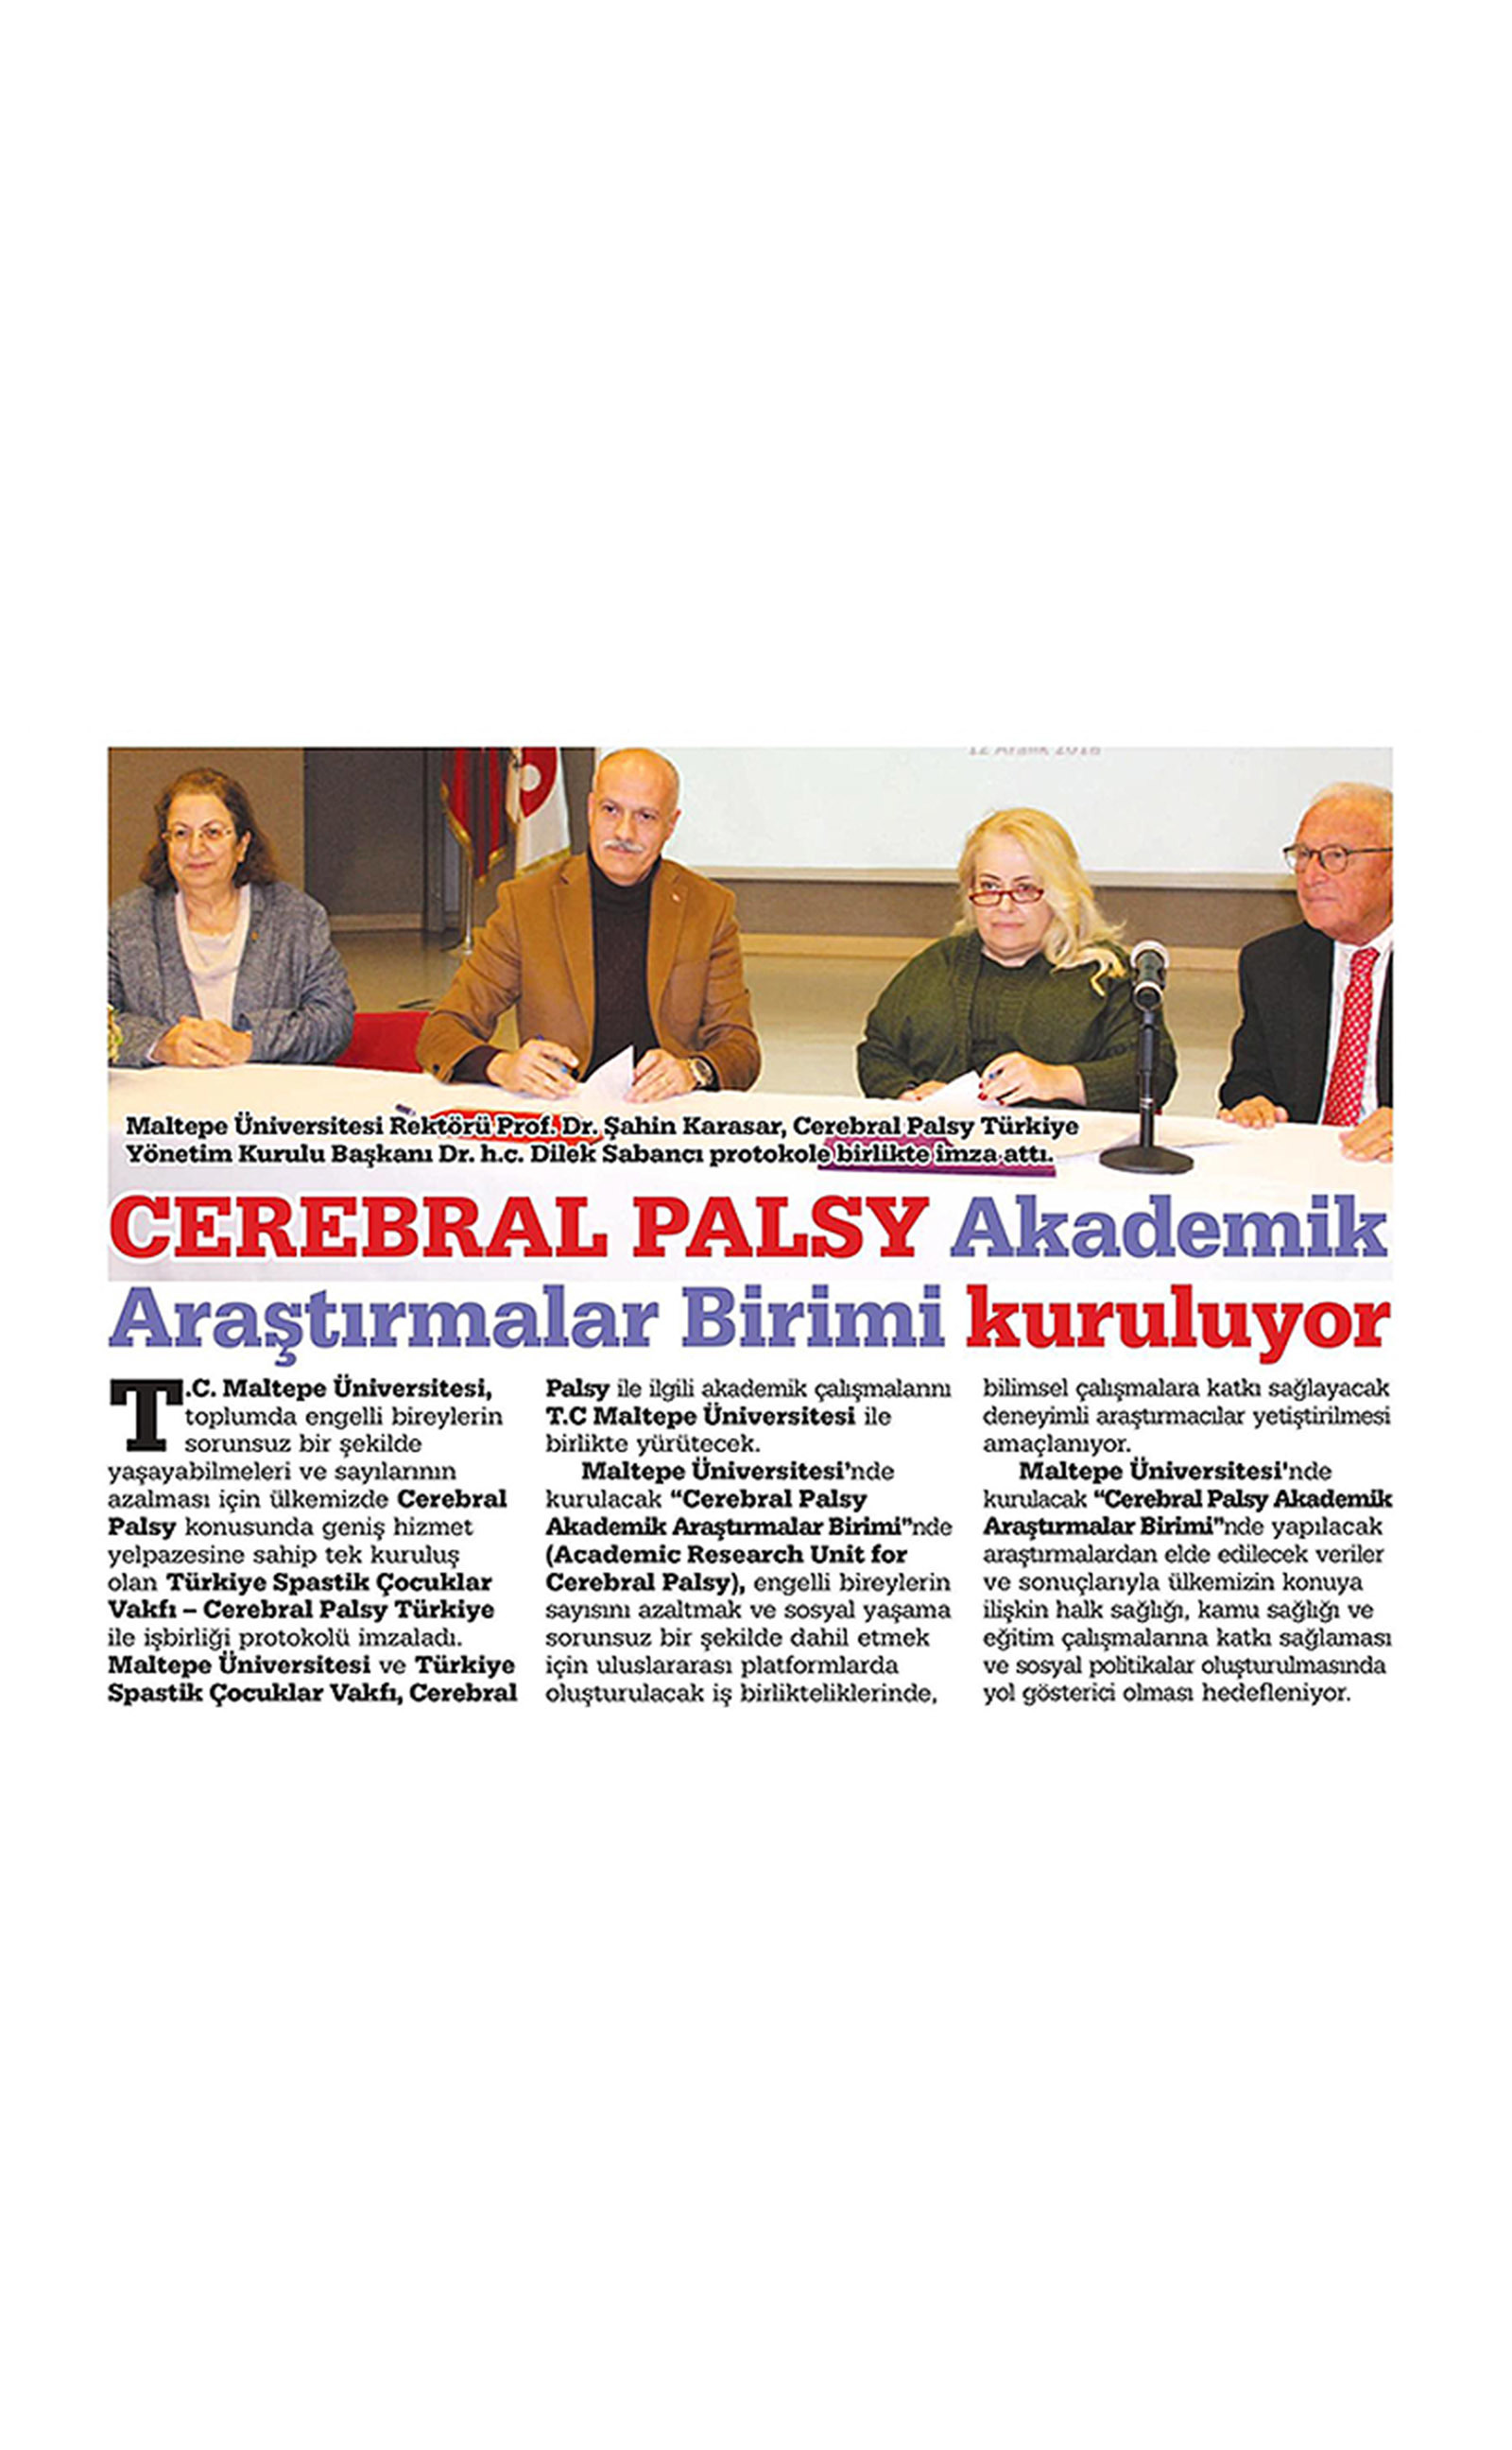 CEREBRAL PALSY Academic Research Unit is being established